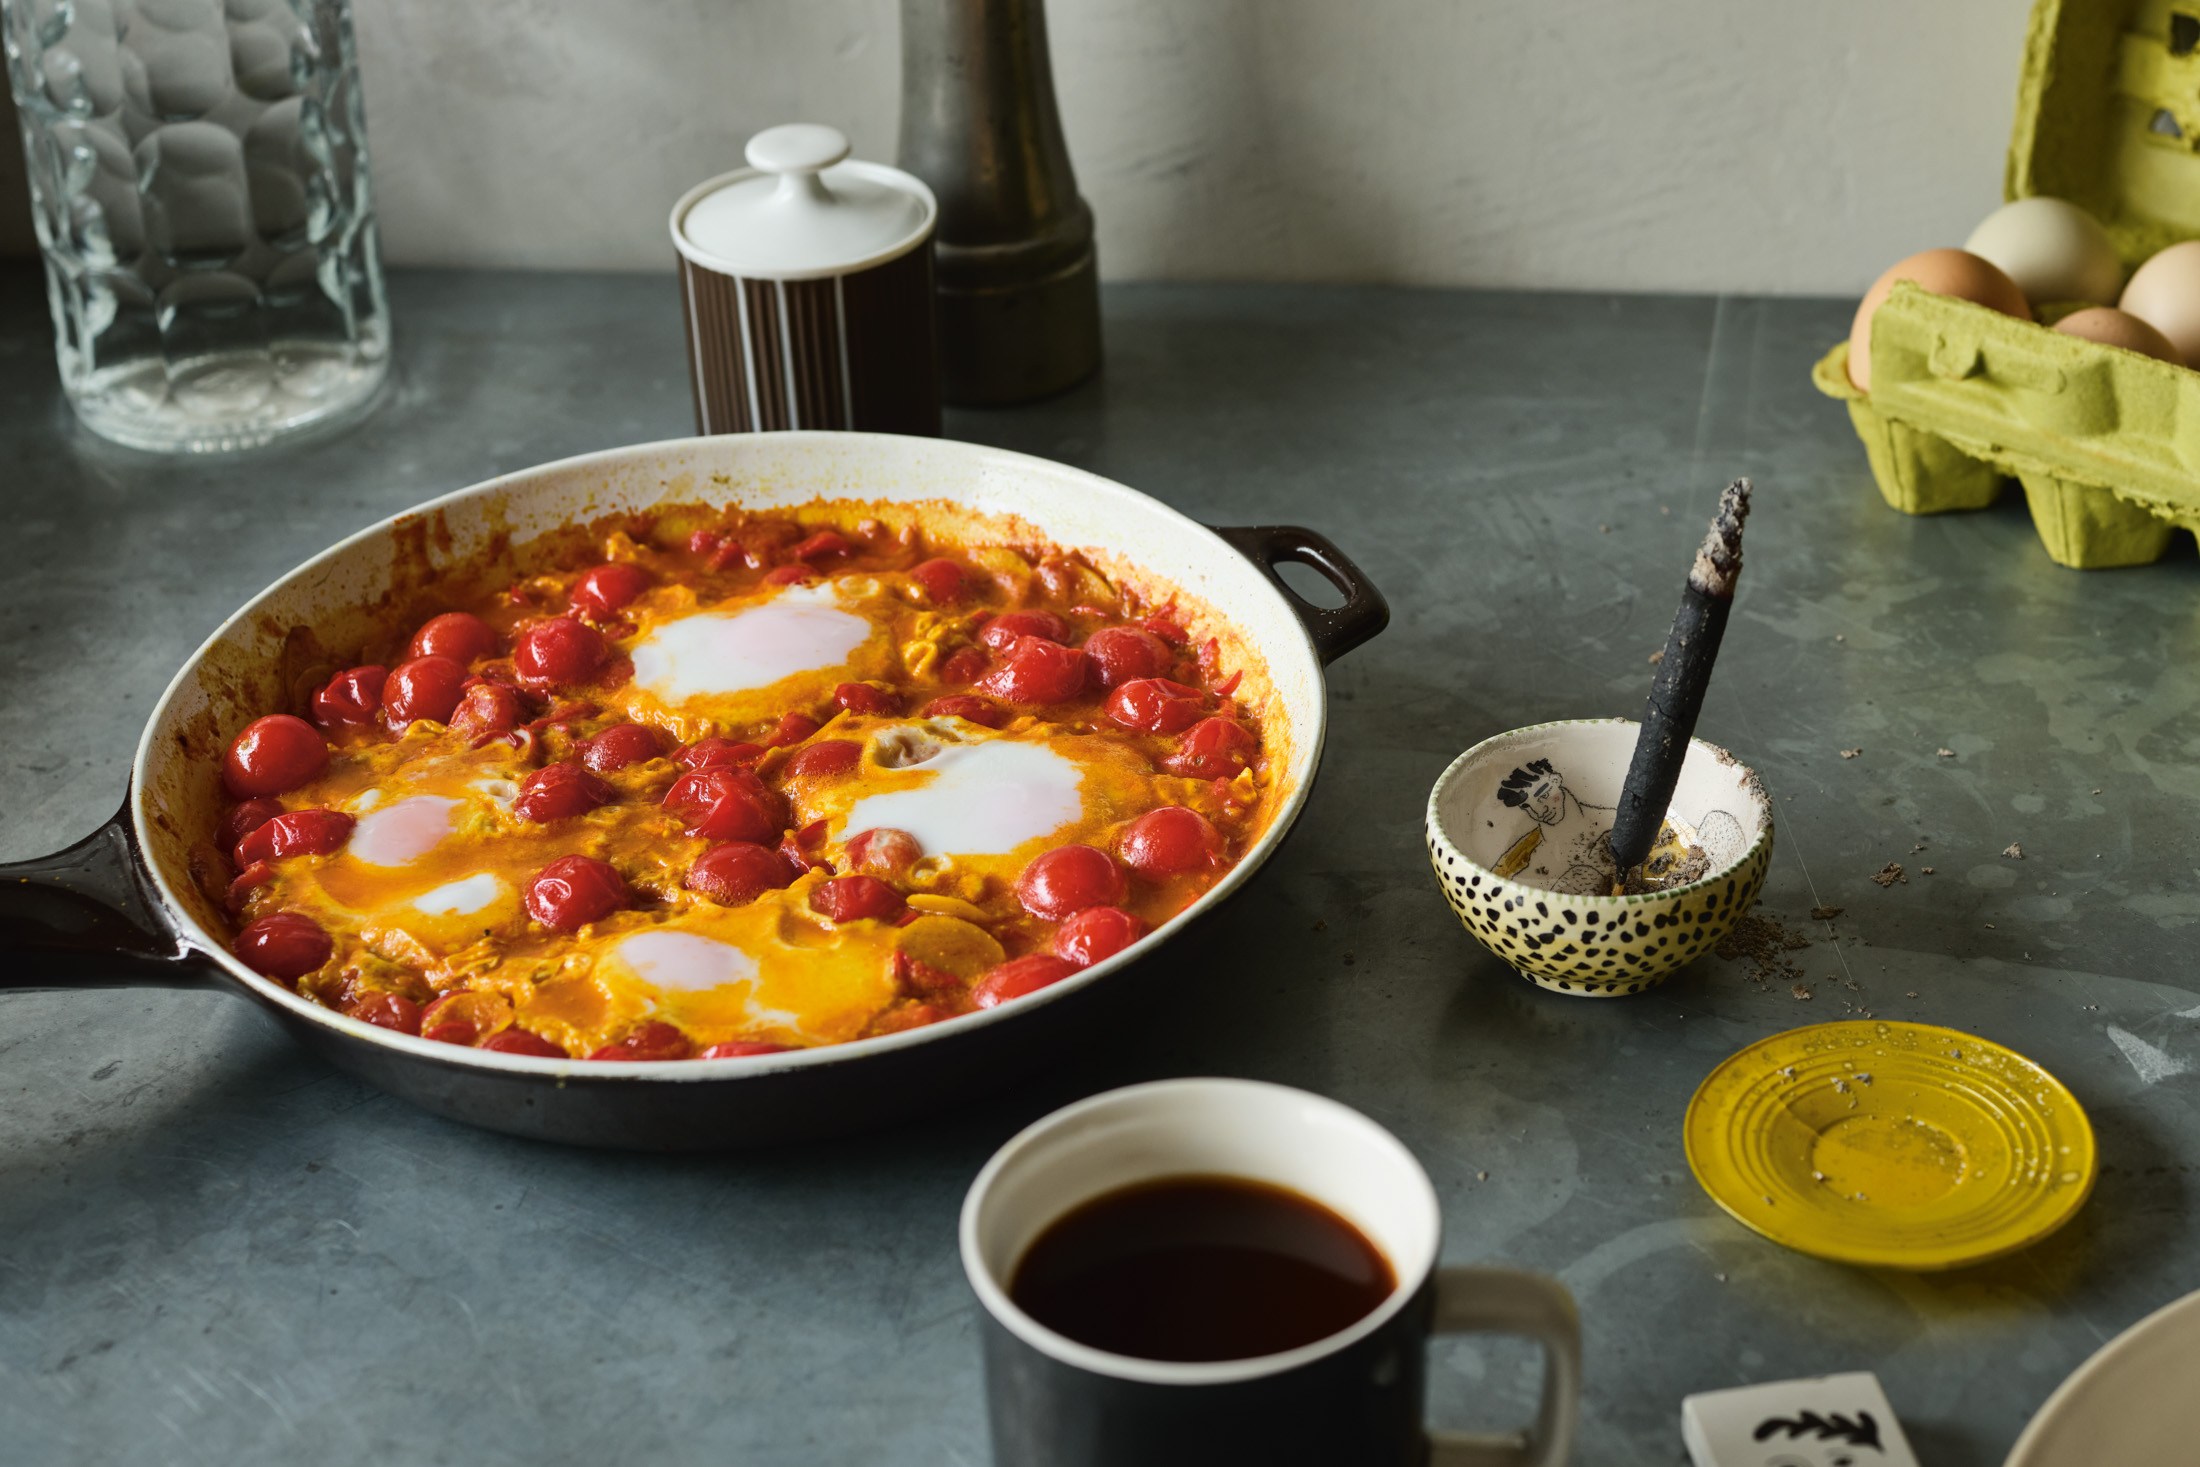 A Luxurious Yet Simple Baked Egg Dish Recipe for Mother's Day